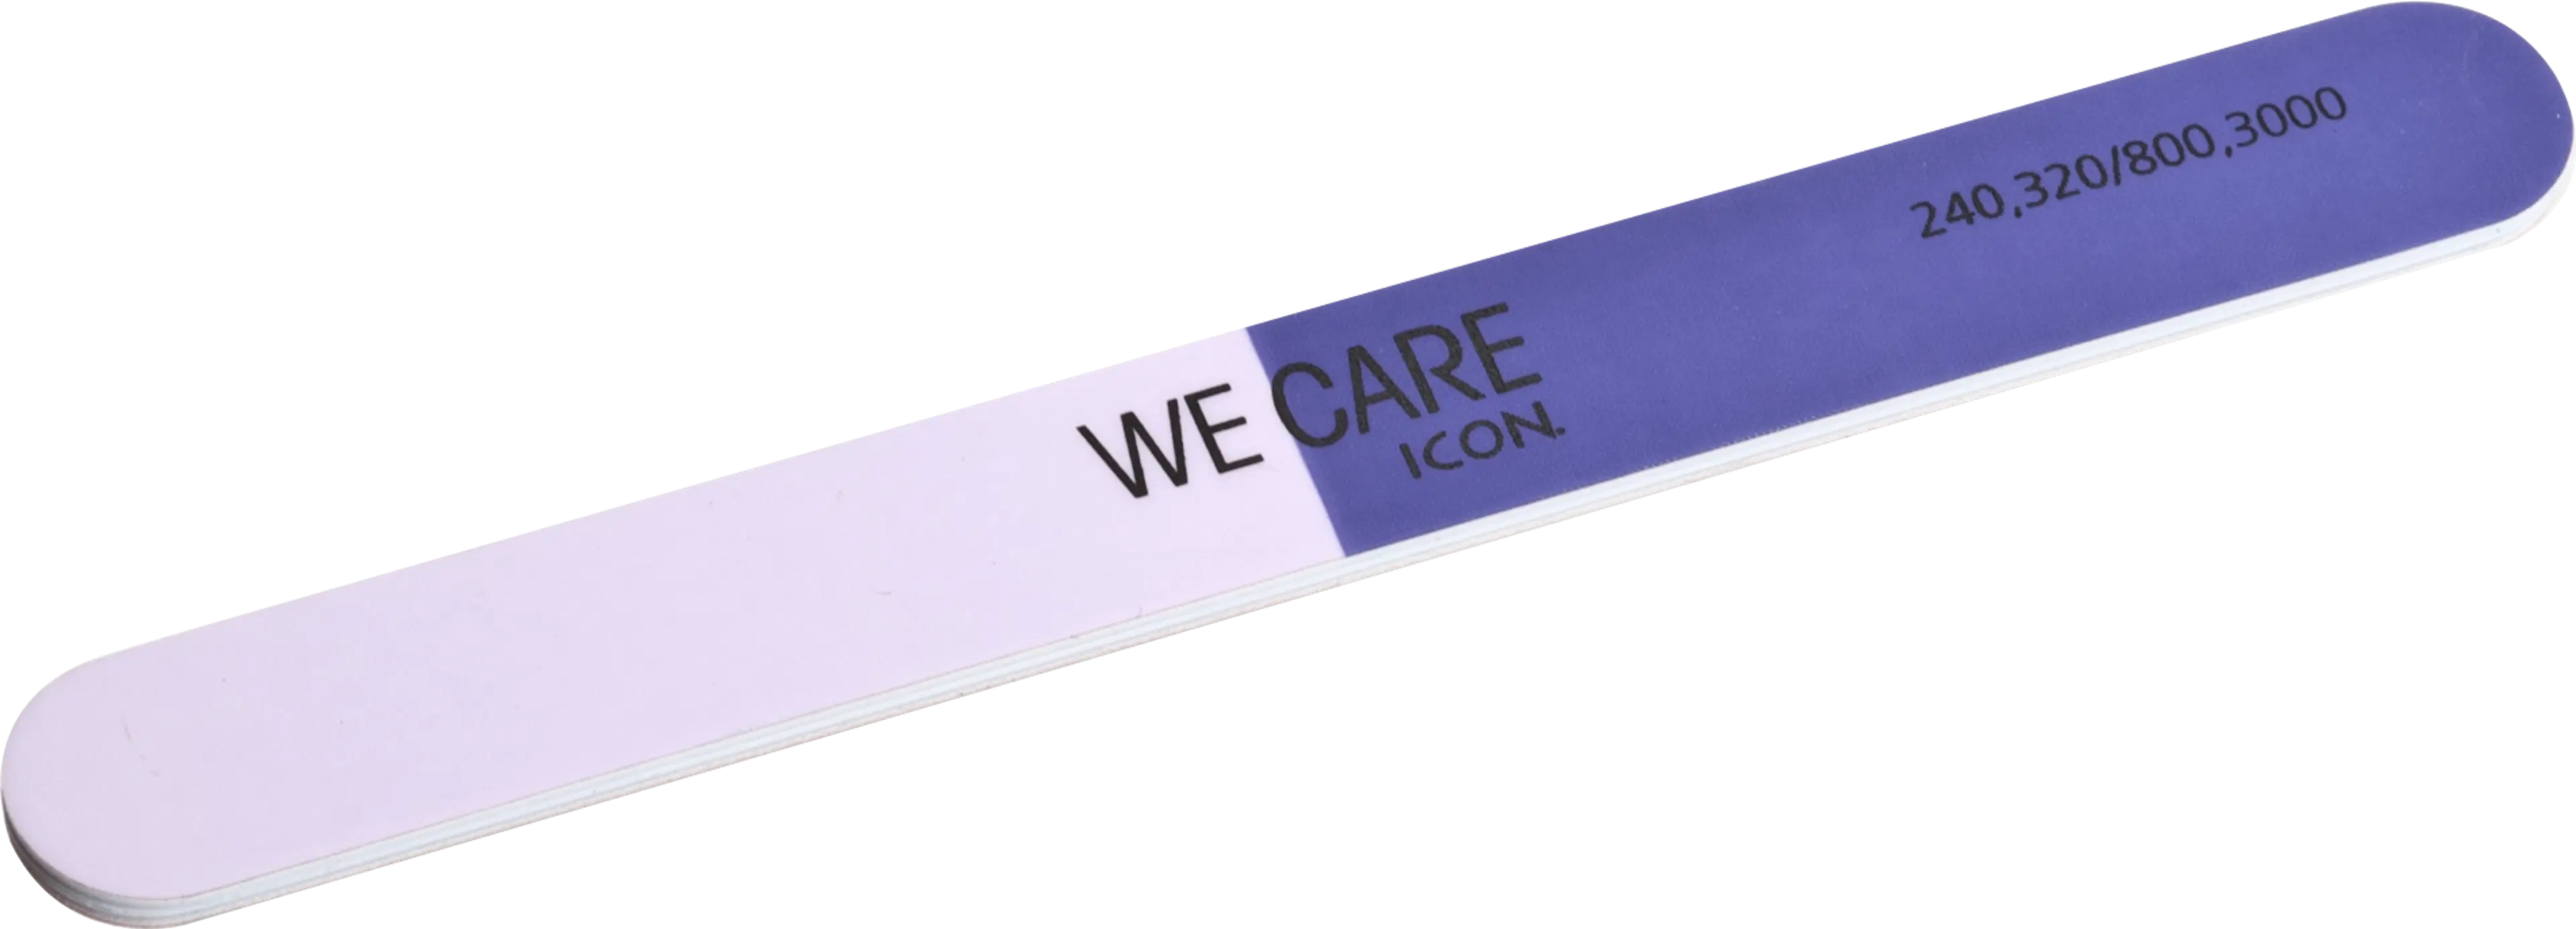 WE CARE ICON. All in 1 Nail File120/180/240/320 grit, kynsiviila